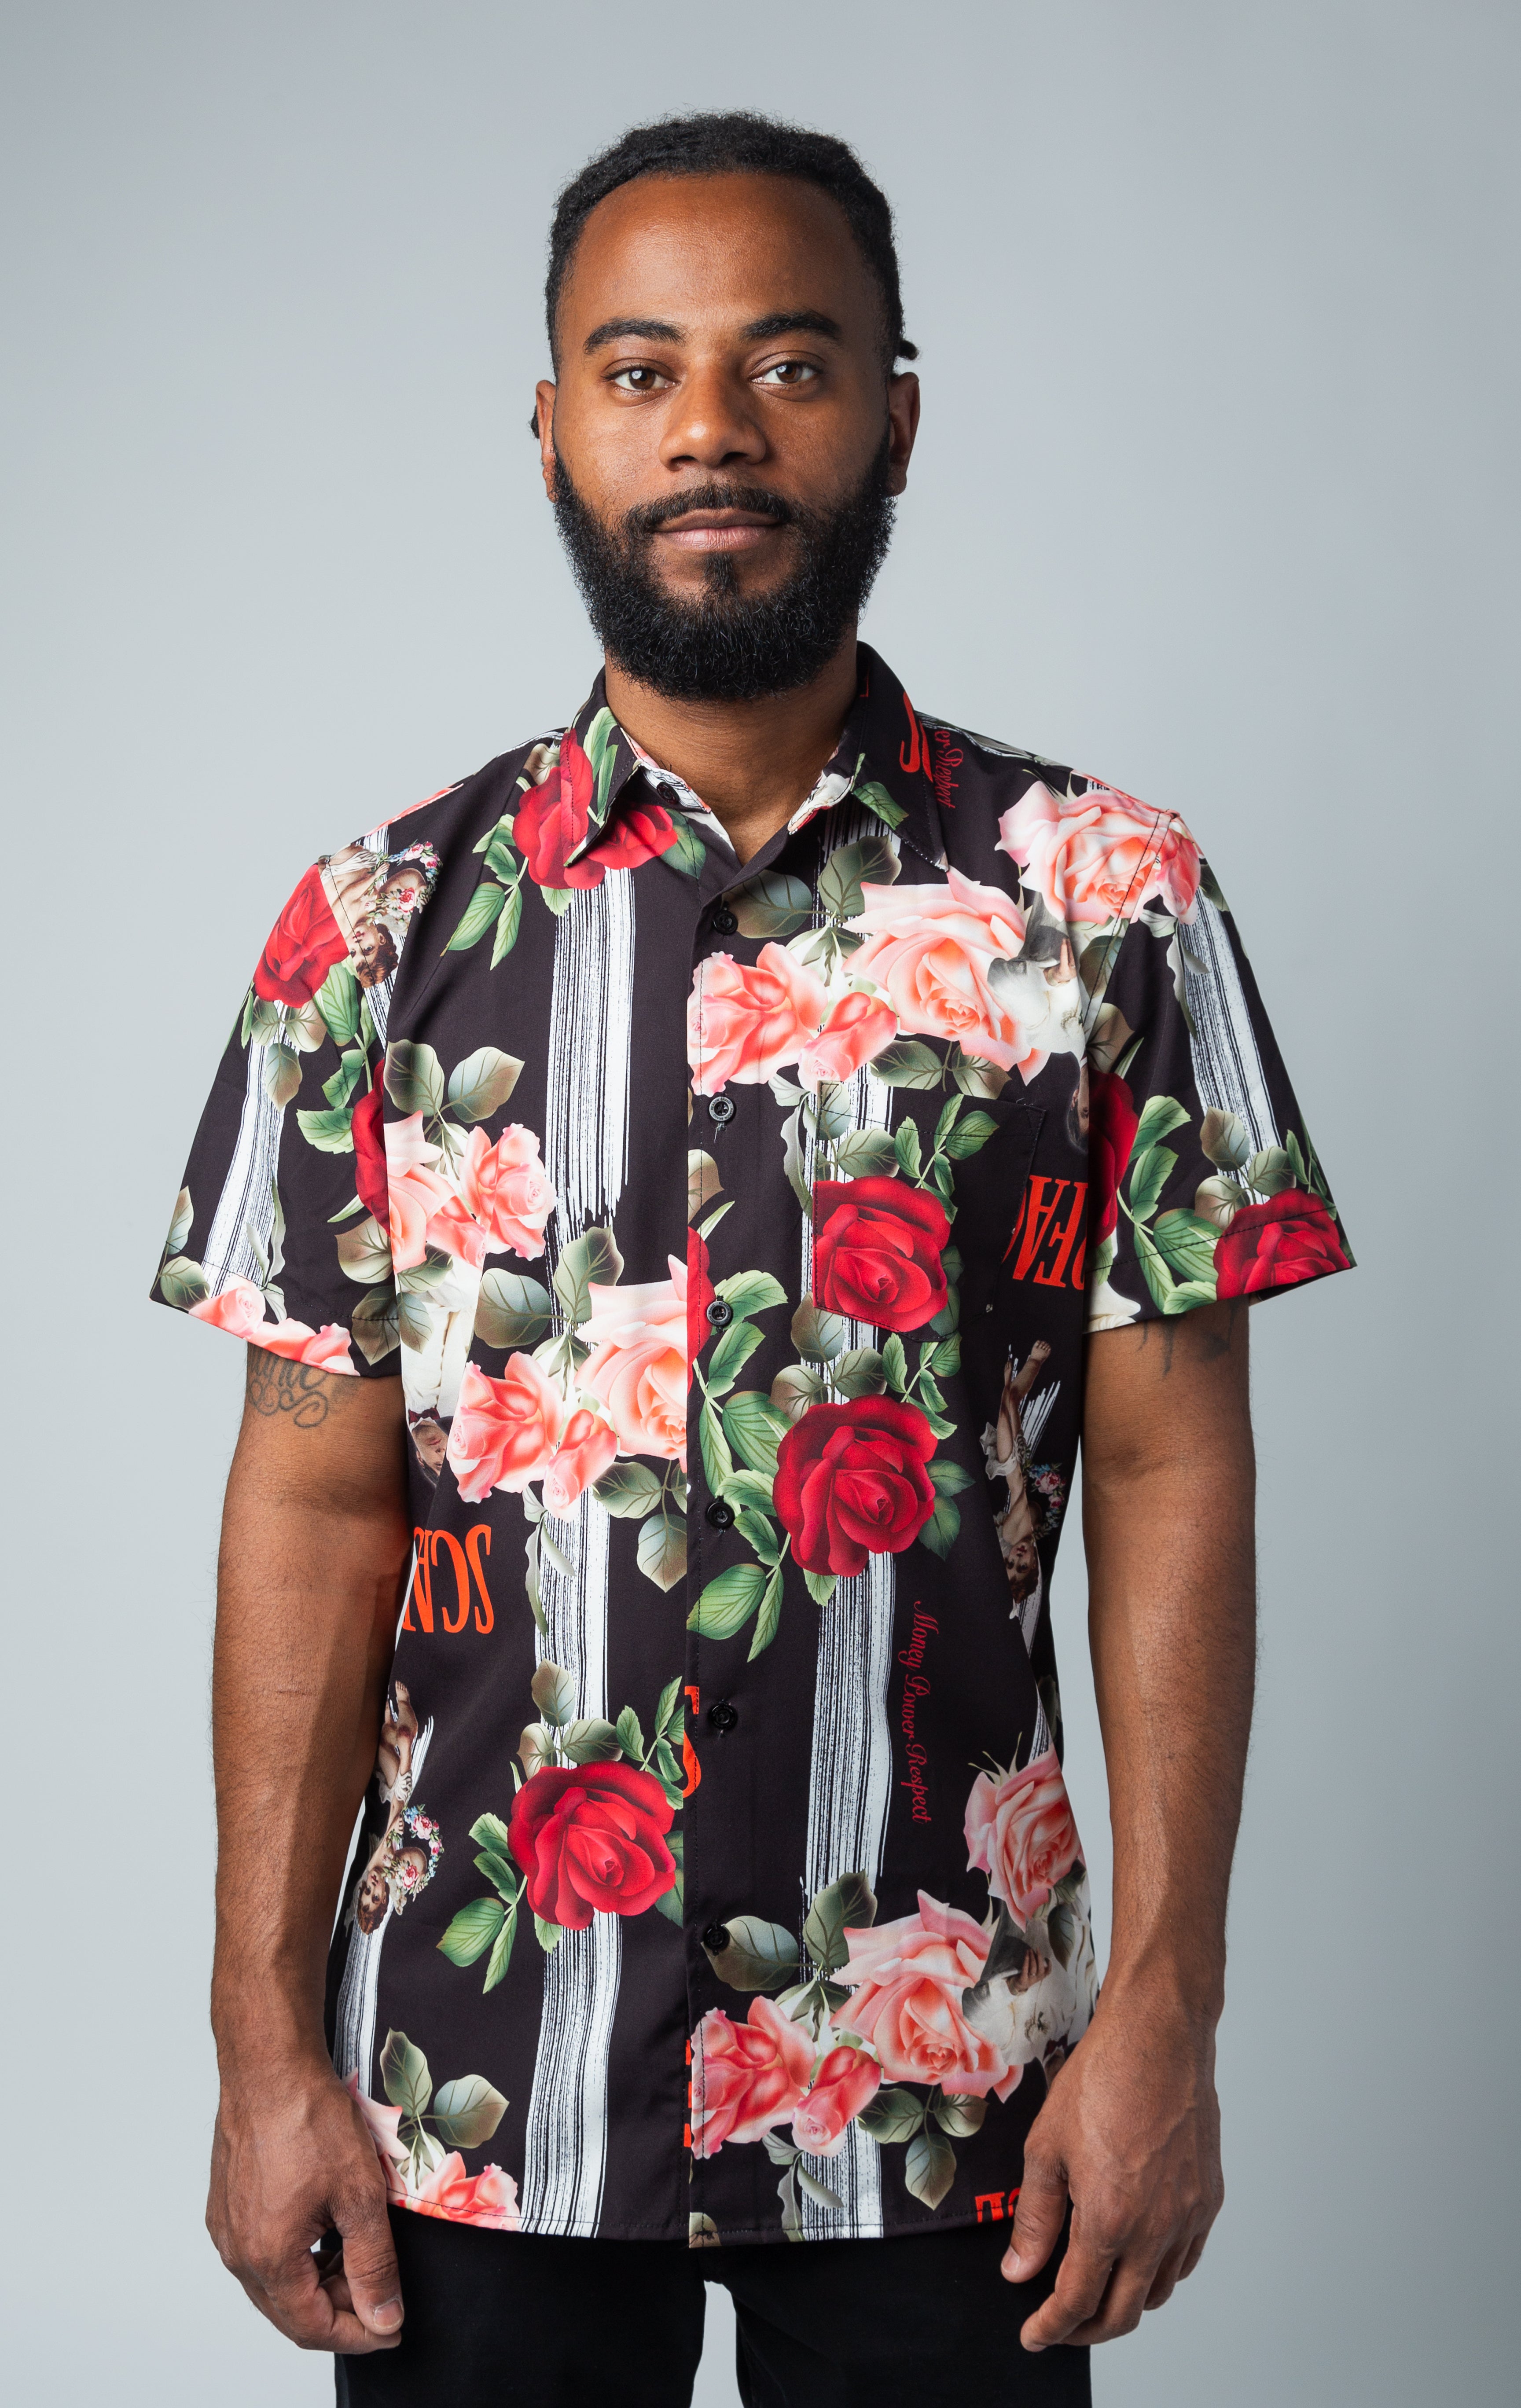 Scarface all-over print, classic button-up shirt style with a spread collar and short sleeves.